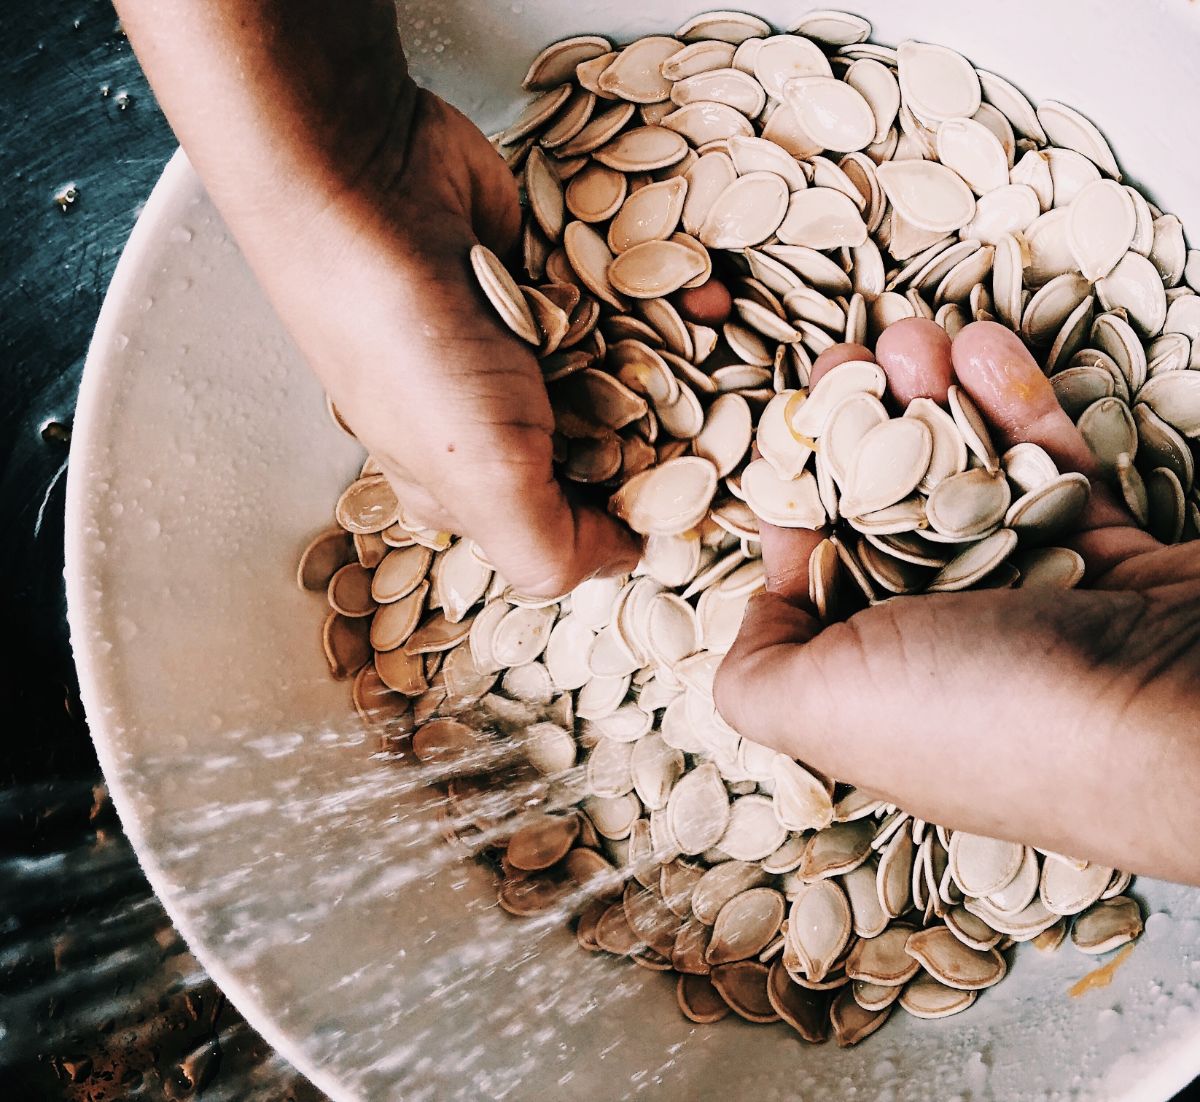 Pumpkin seeds being washed to remove pulp